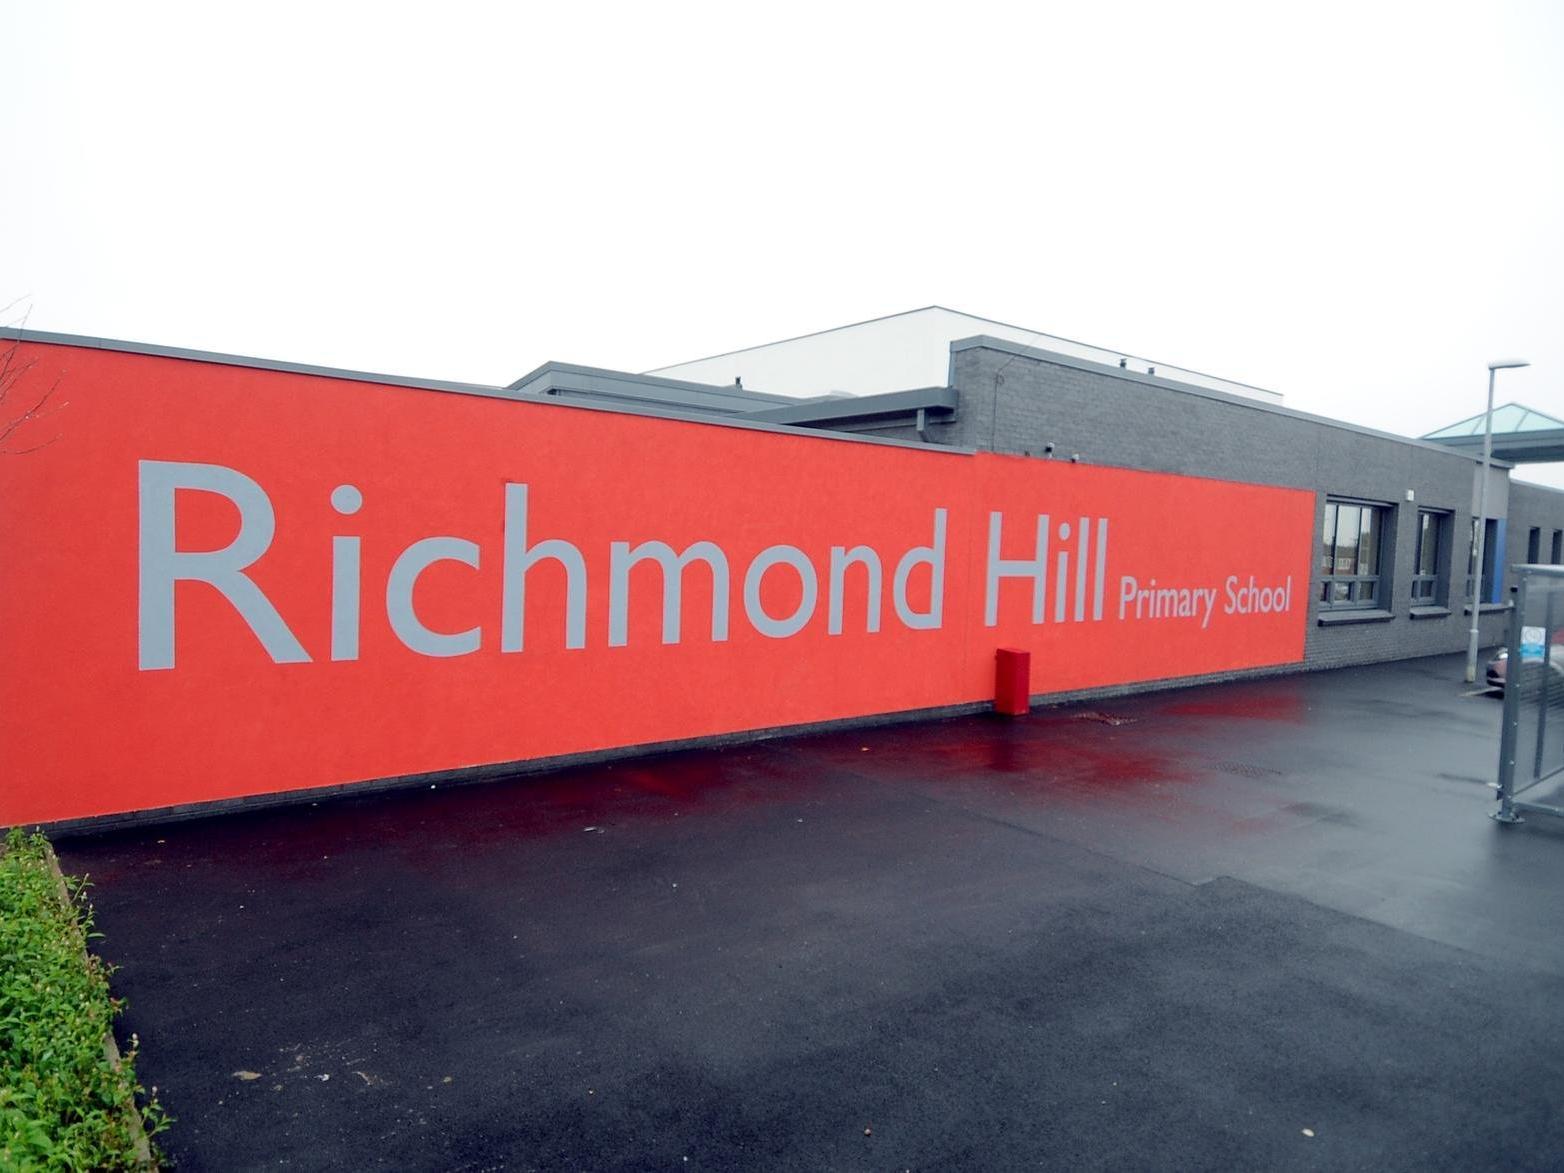 35 per cent of students at The Richmond Hill Academy met their expected standard